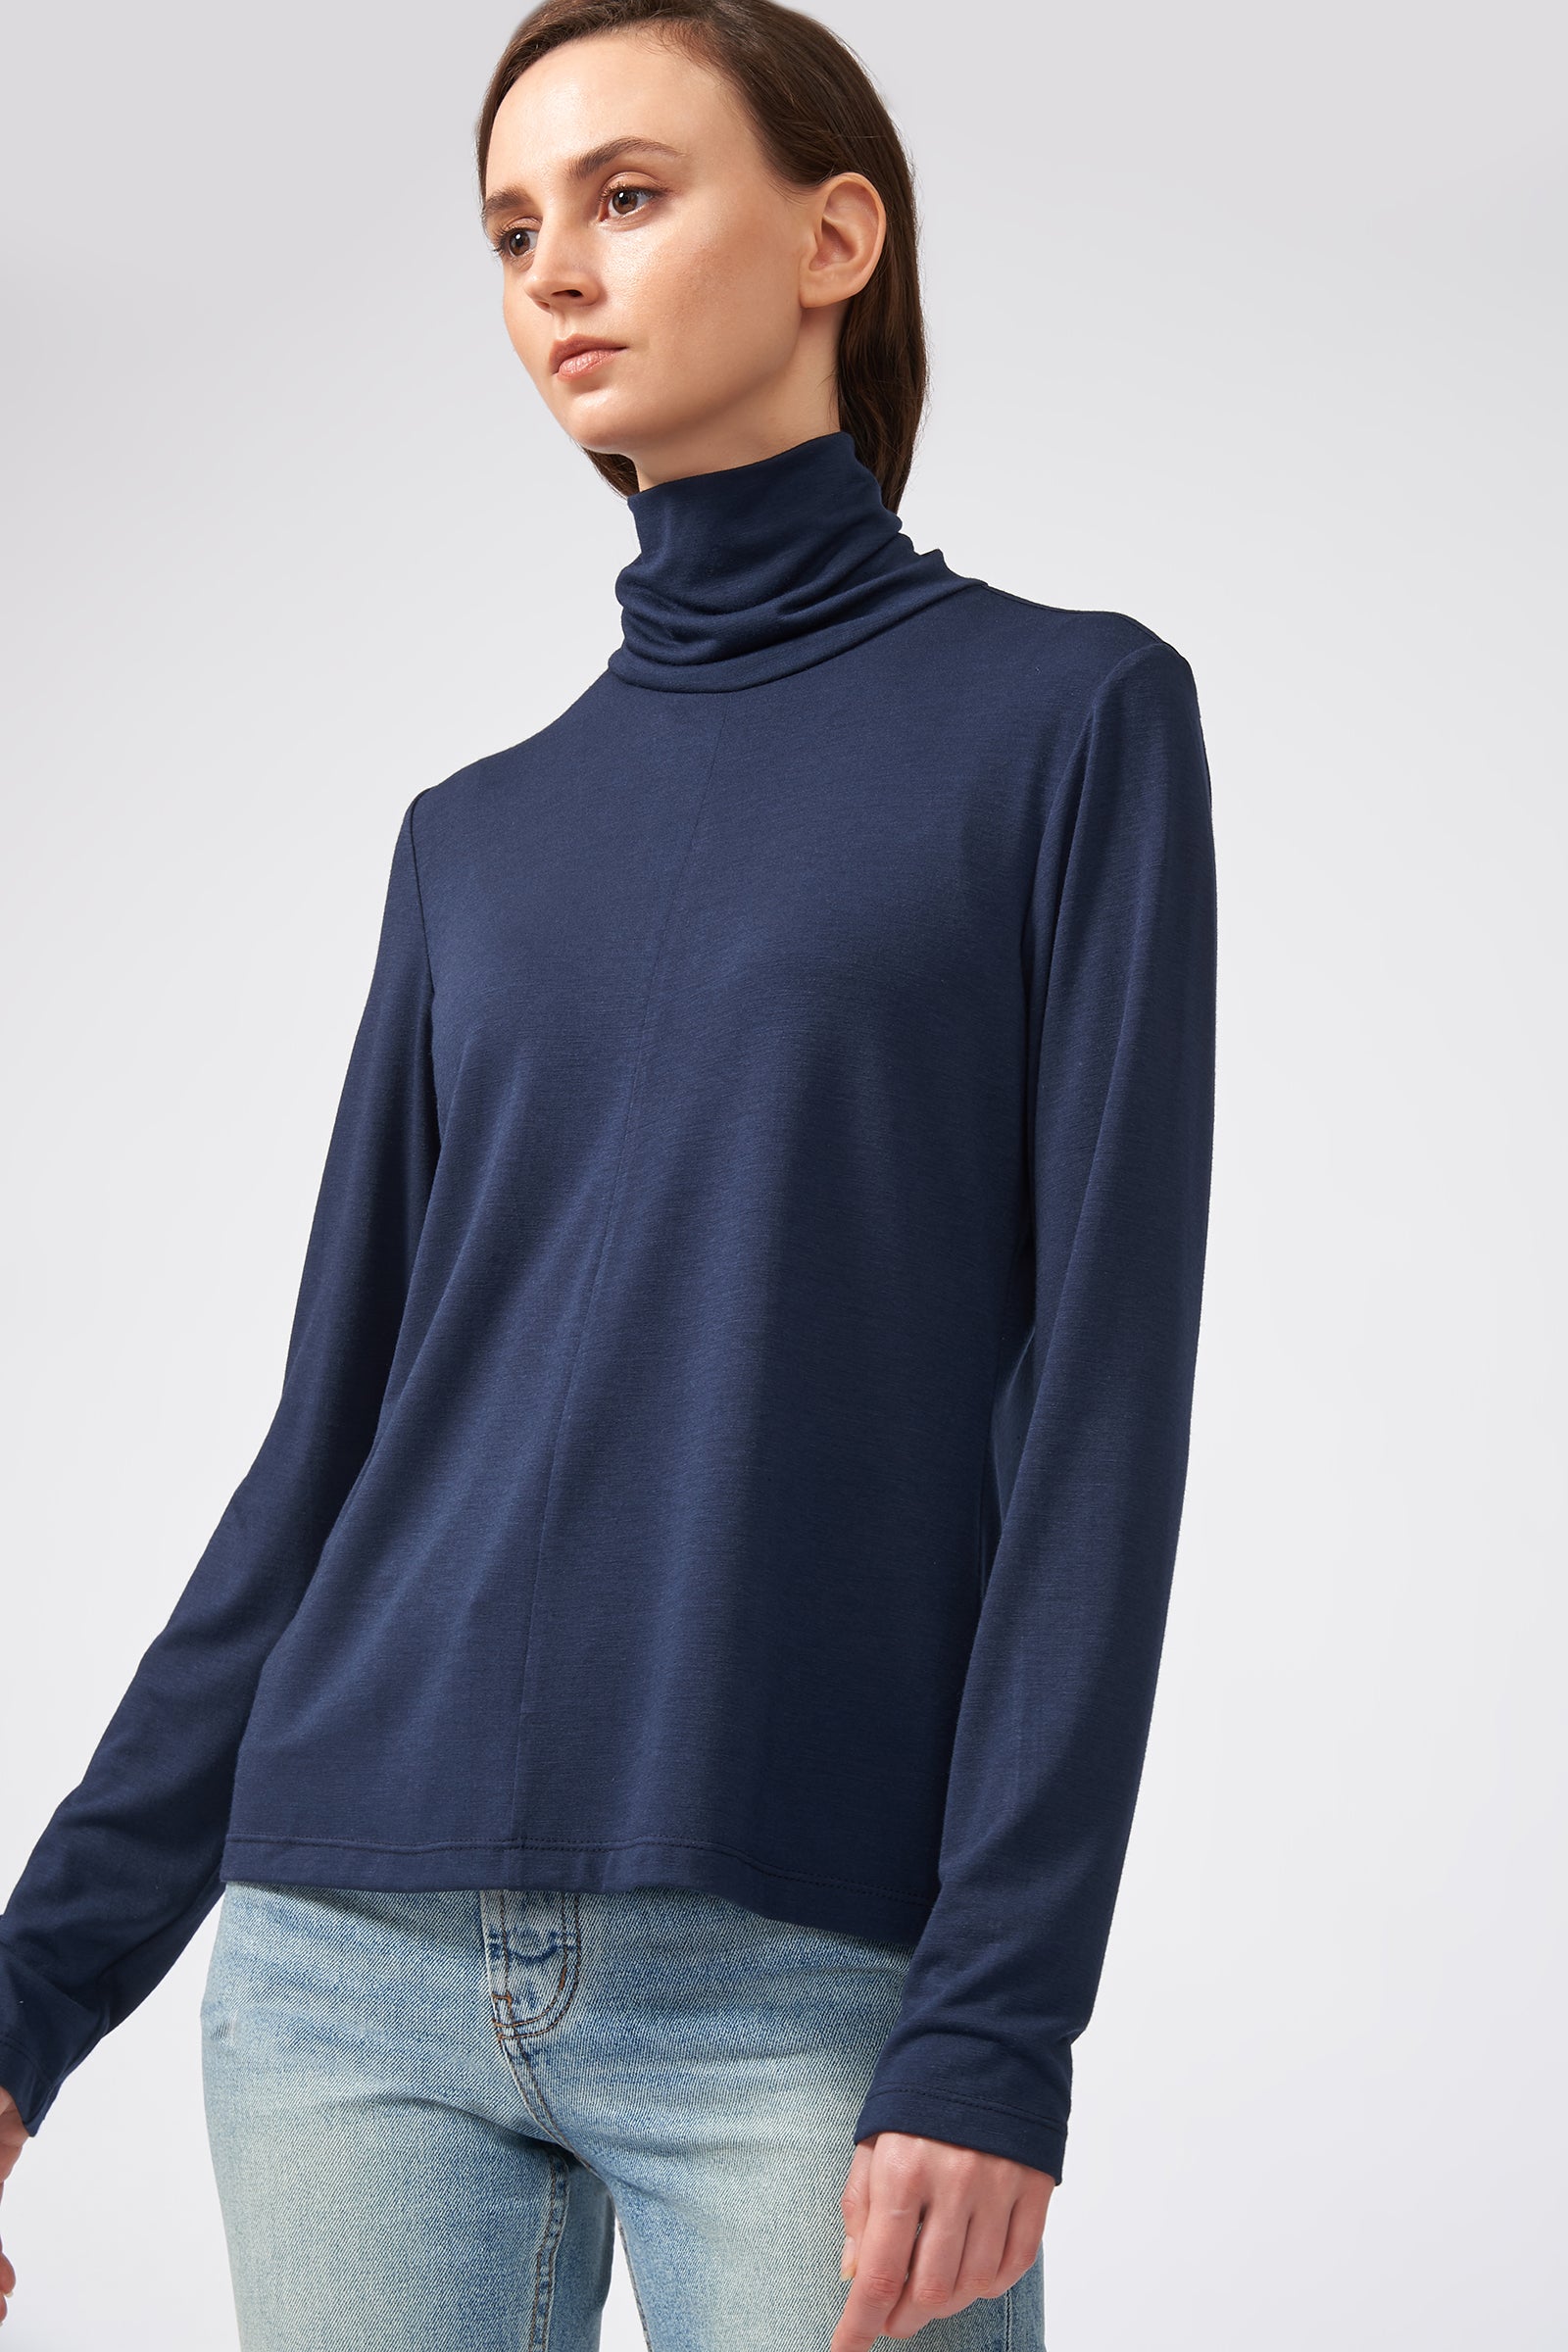 Kal Rieman Seamed Fitted Turtleneck in Navy on Model Front Side View